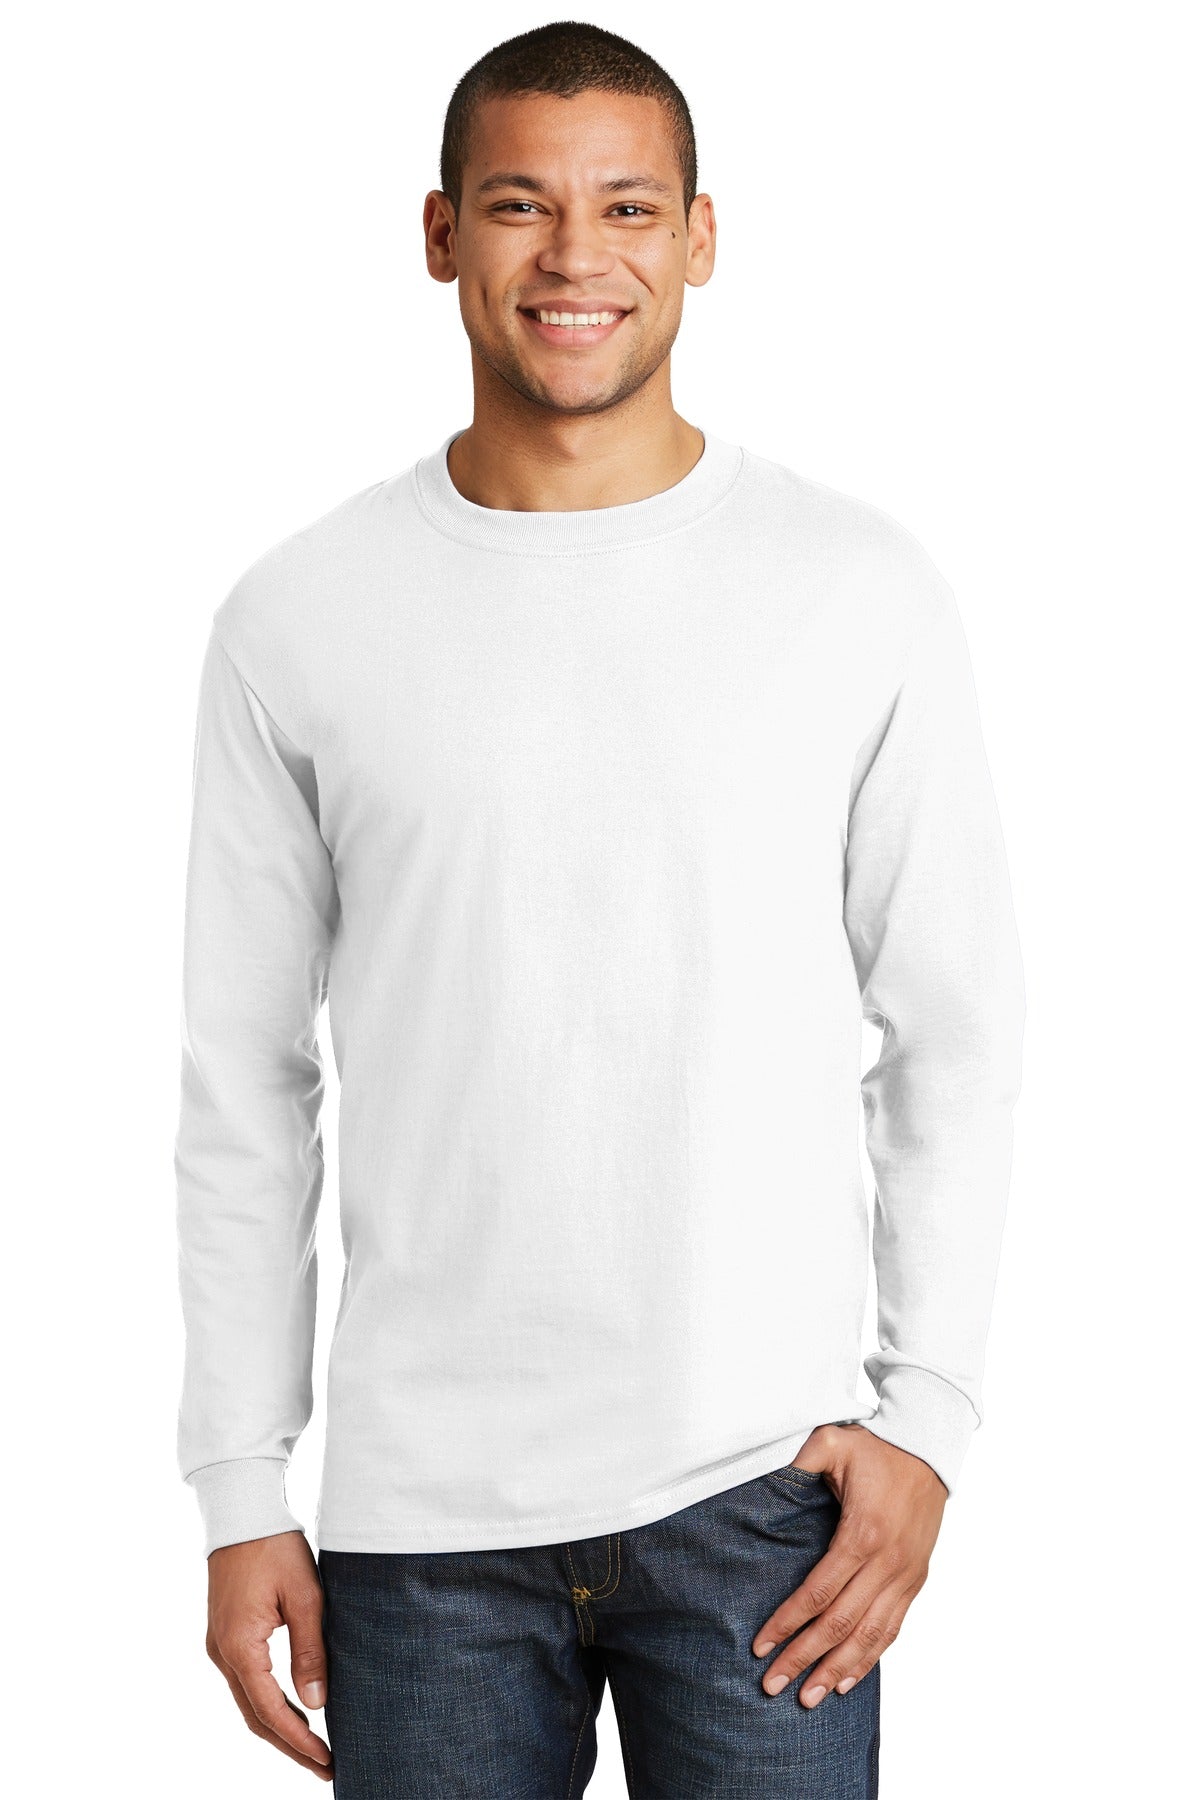 West Side Corvette ClubHanes® Beefy-T® -  100% Cotton Long Sleeve T-Shirt.  5186